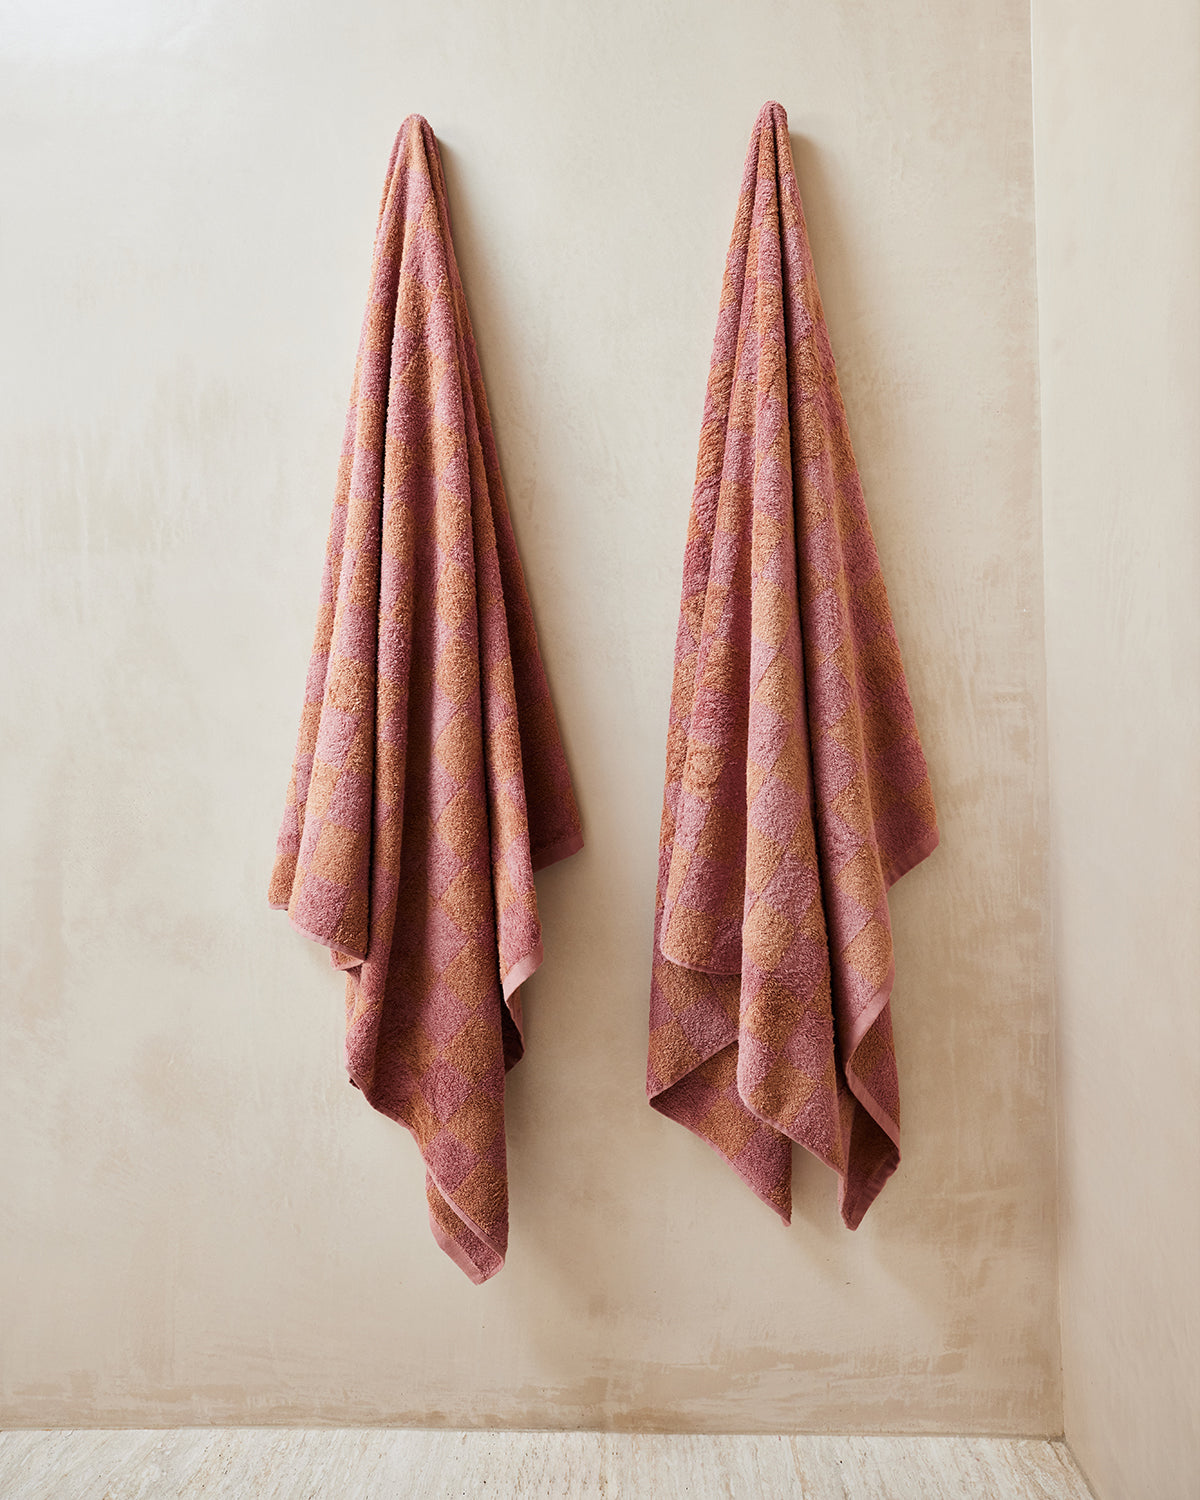 100% Linen Waffle Hand and Face Towel in Pink Clay - Bed Threads